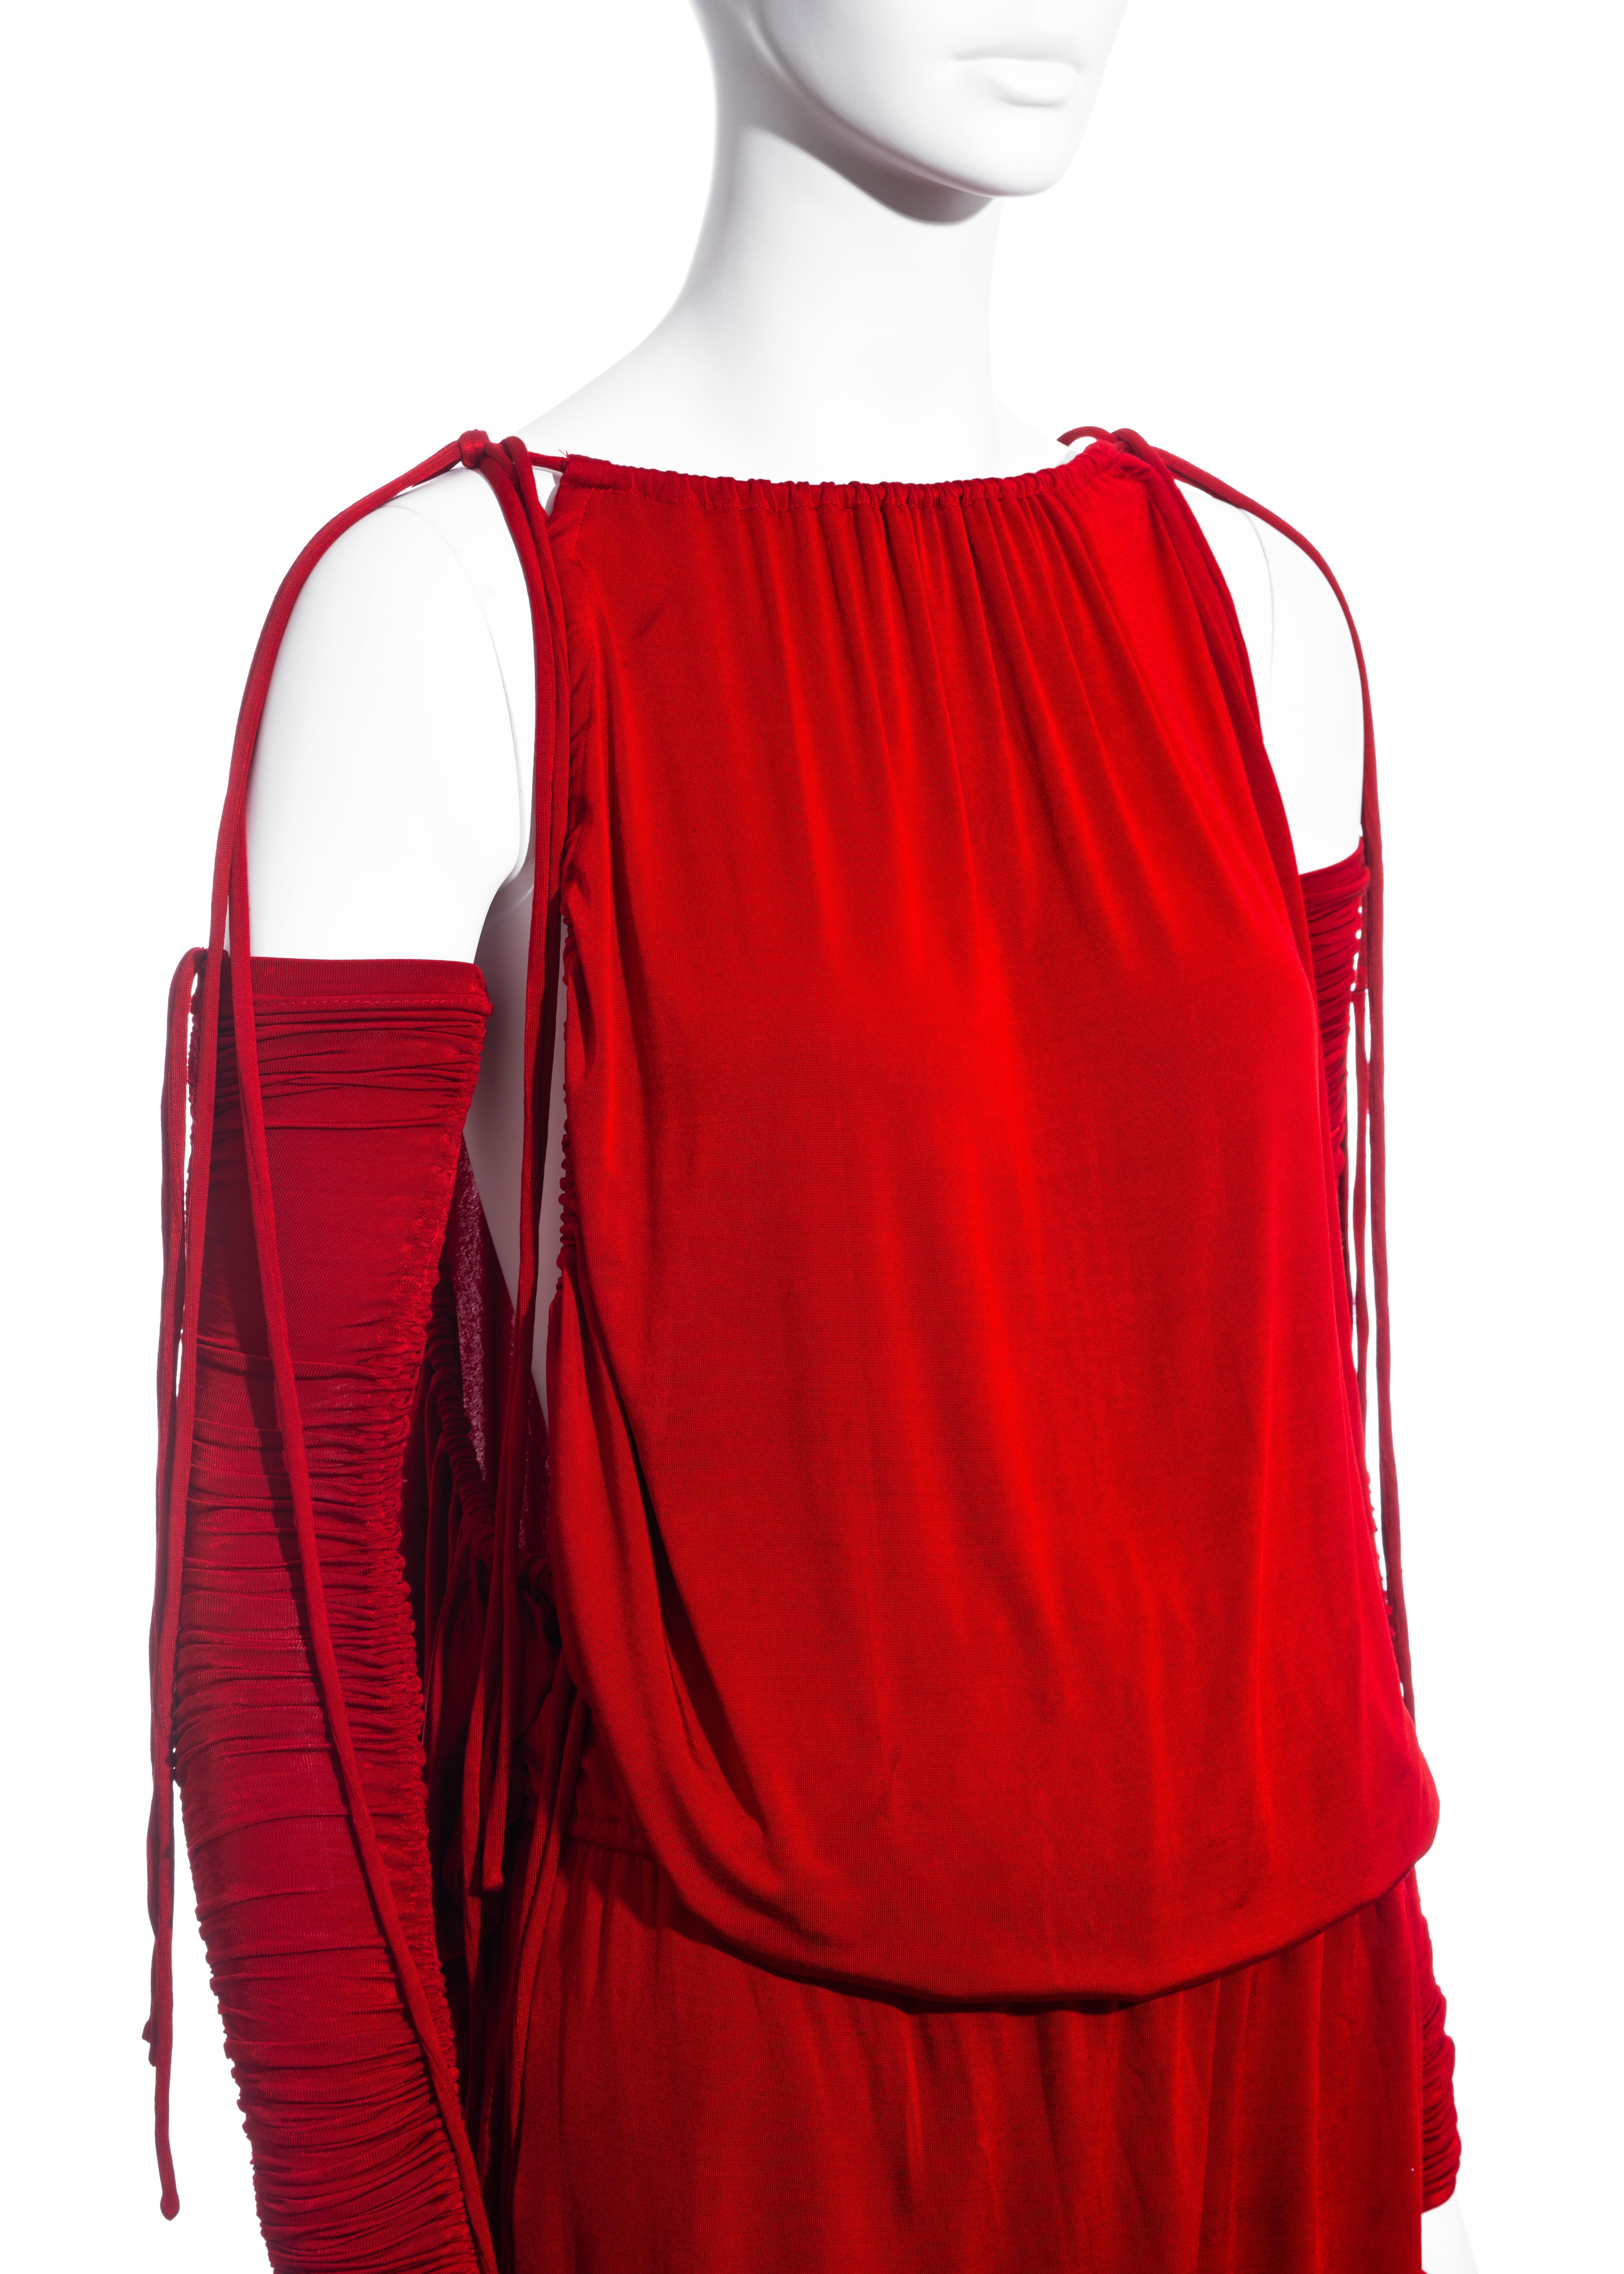 Women's Dolce & Gabbana red rayon drawstring mini dress and sleeves, ss 2003  For Sale